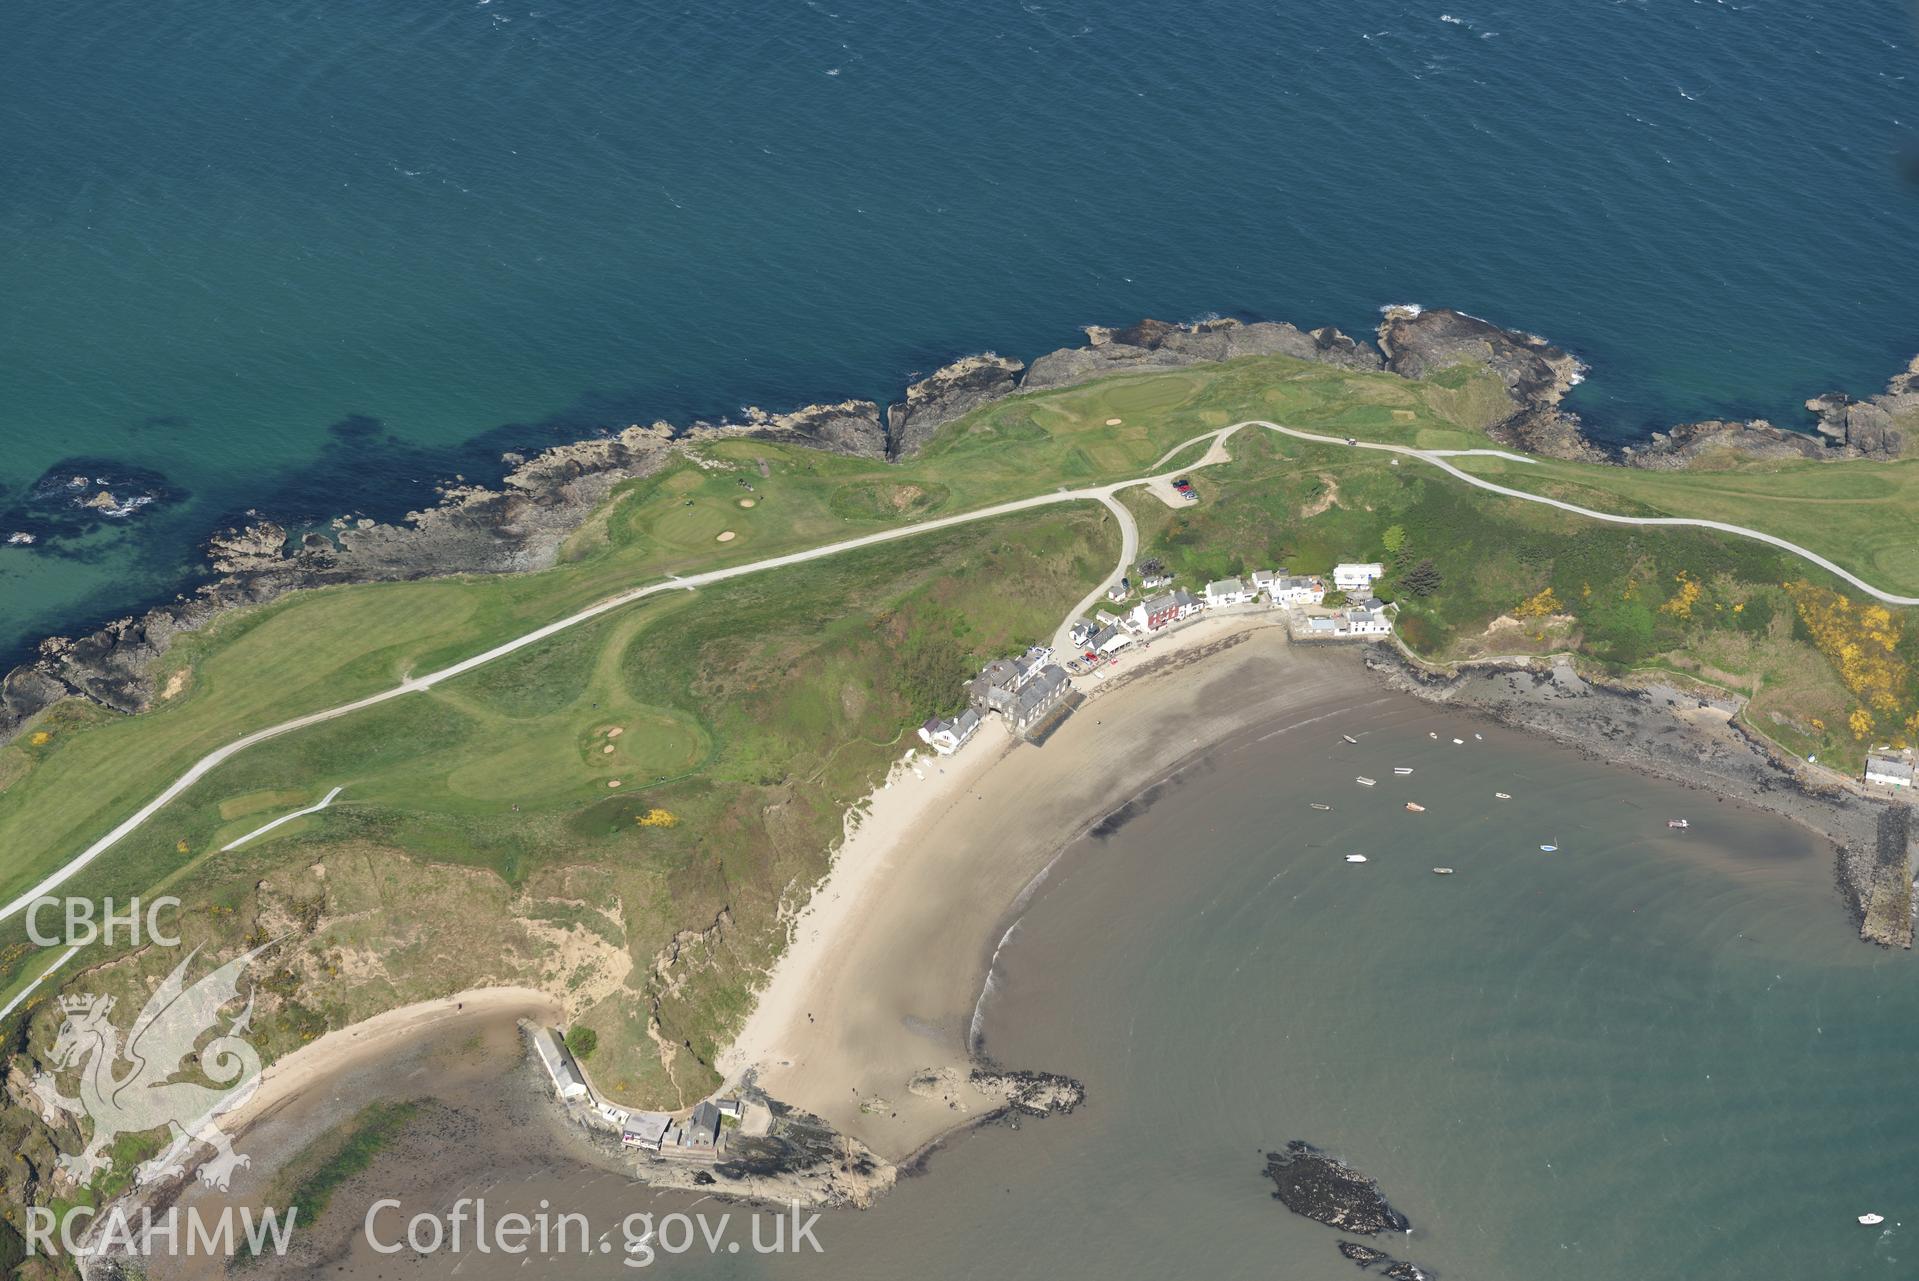 Aerial photography of Porth Dinllaen taken on 3rd May 2017.  Baseline aerial reconnaissance survey for the CHERISH Project. ? Crown: CHERISH PROJECT 2017. Produced with EU funds through the Ireland Wales Co-operation Programme 2014-2020. All material made freely available through the Open Government Licence.